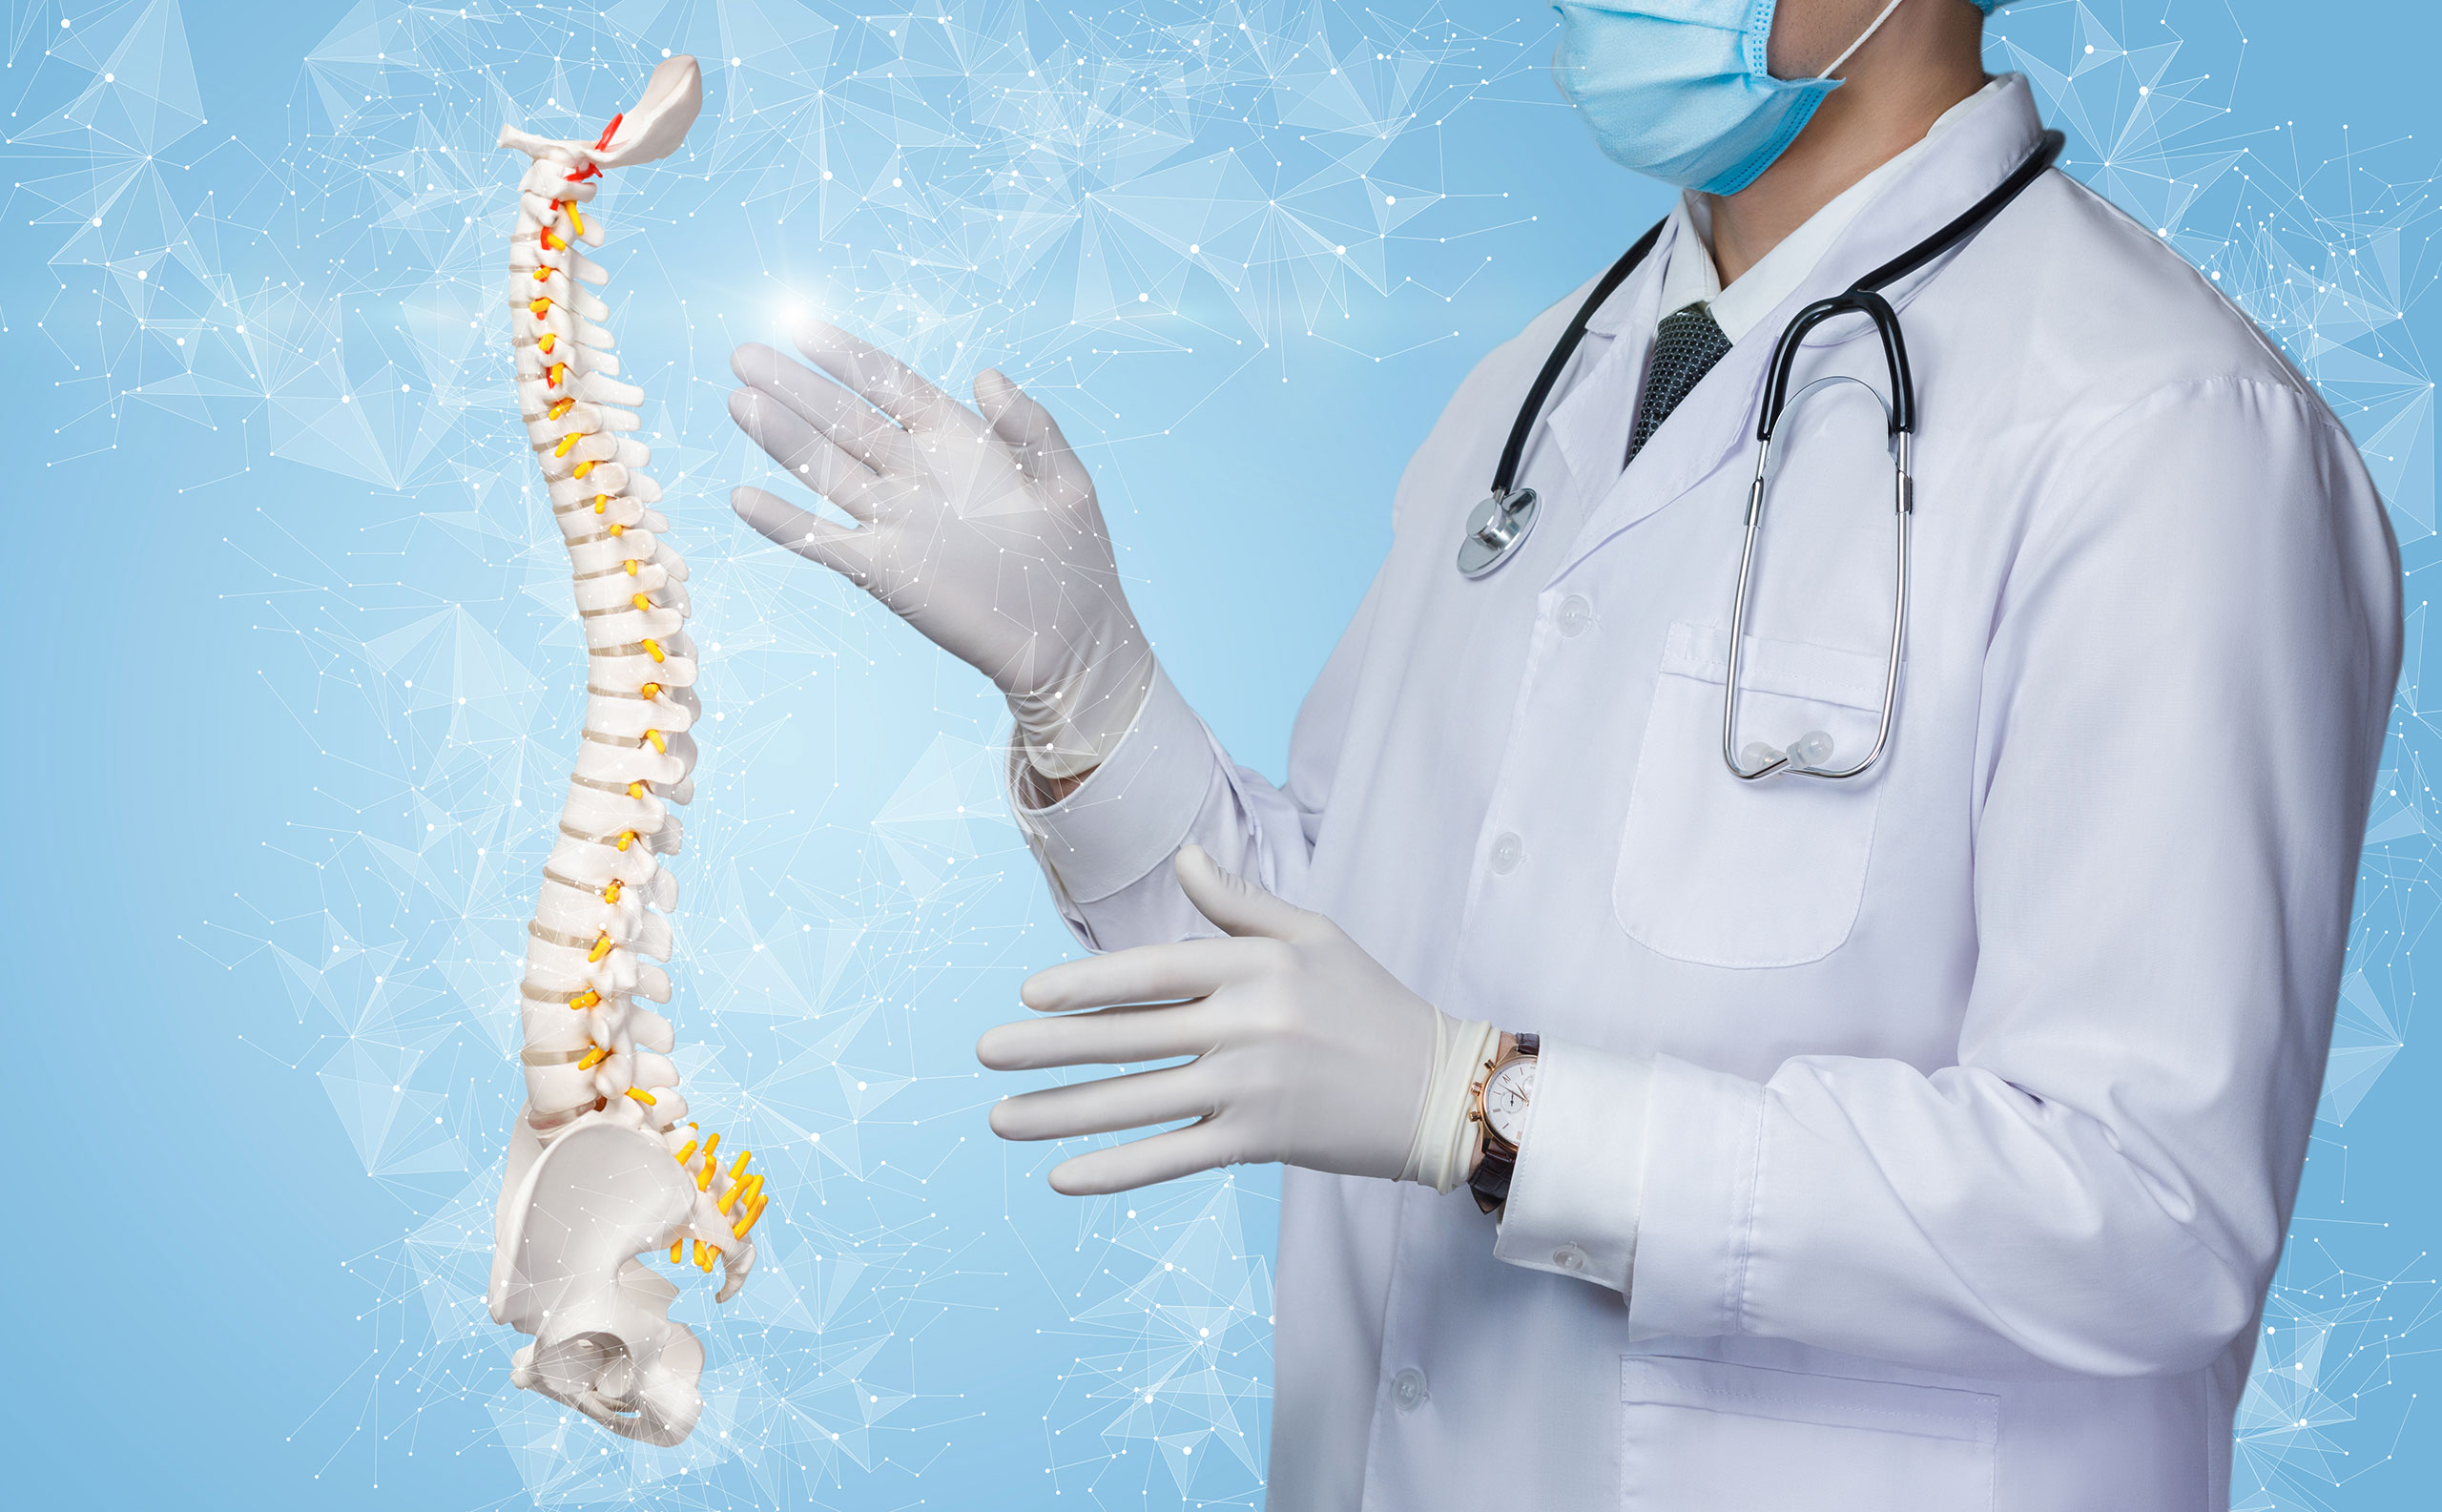 State-of-the-art tools supporting spinal surgery